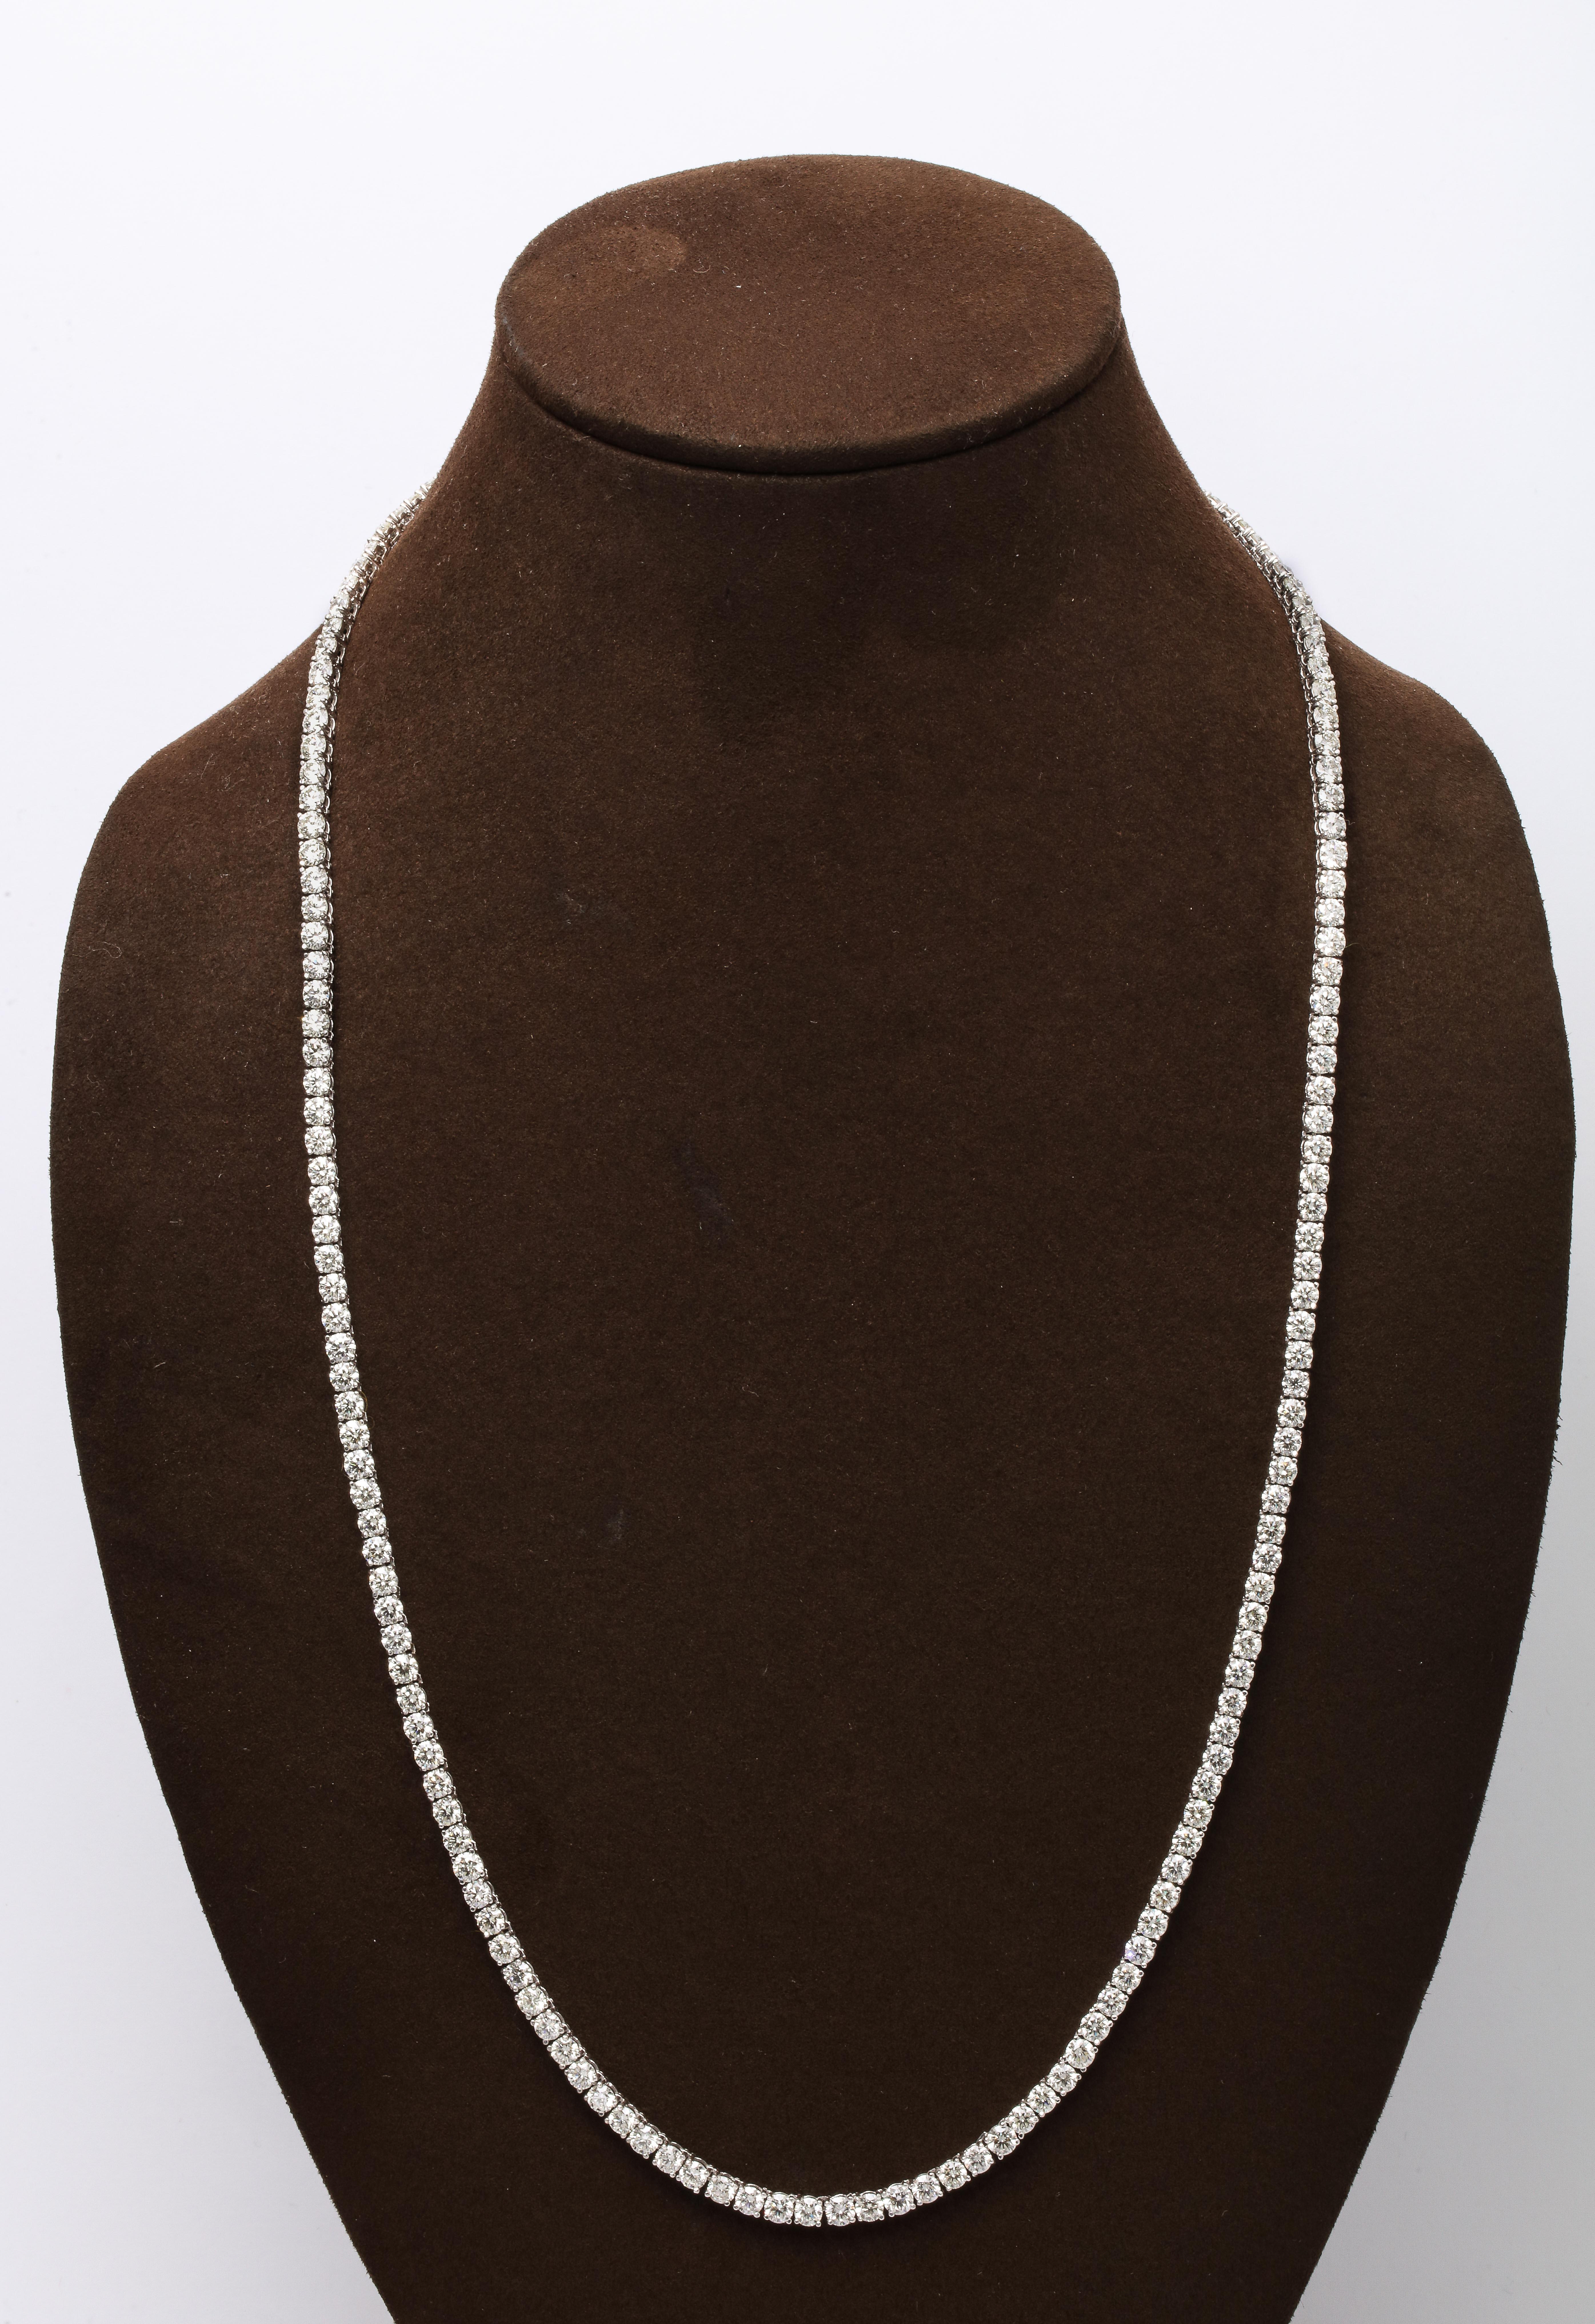 
27.59 carats of white round brilliant cut diamonds set in 14k white gold.

24 inch length 

A fabulous necklace that makes a statement on its own or looks great layered with other pieces. 

Also available in 36 inch length. 